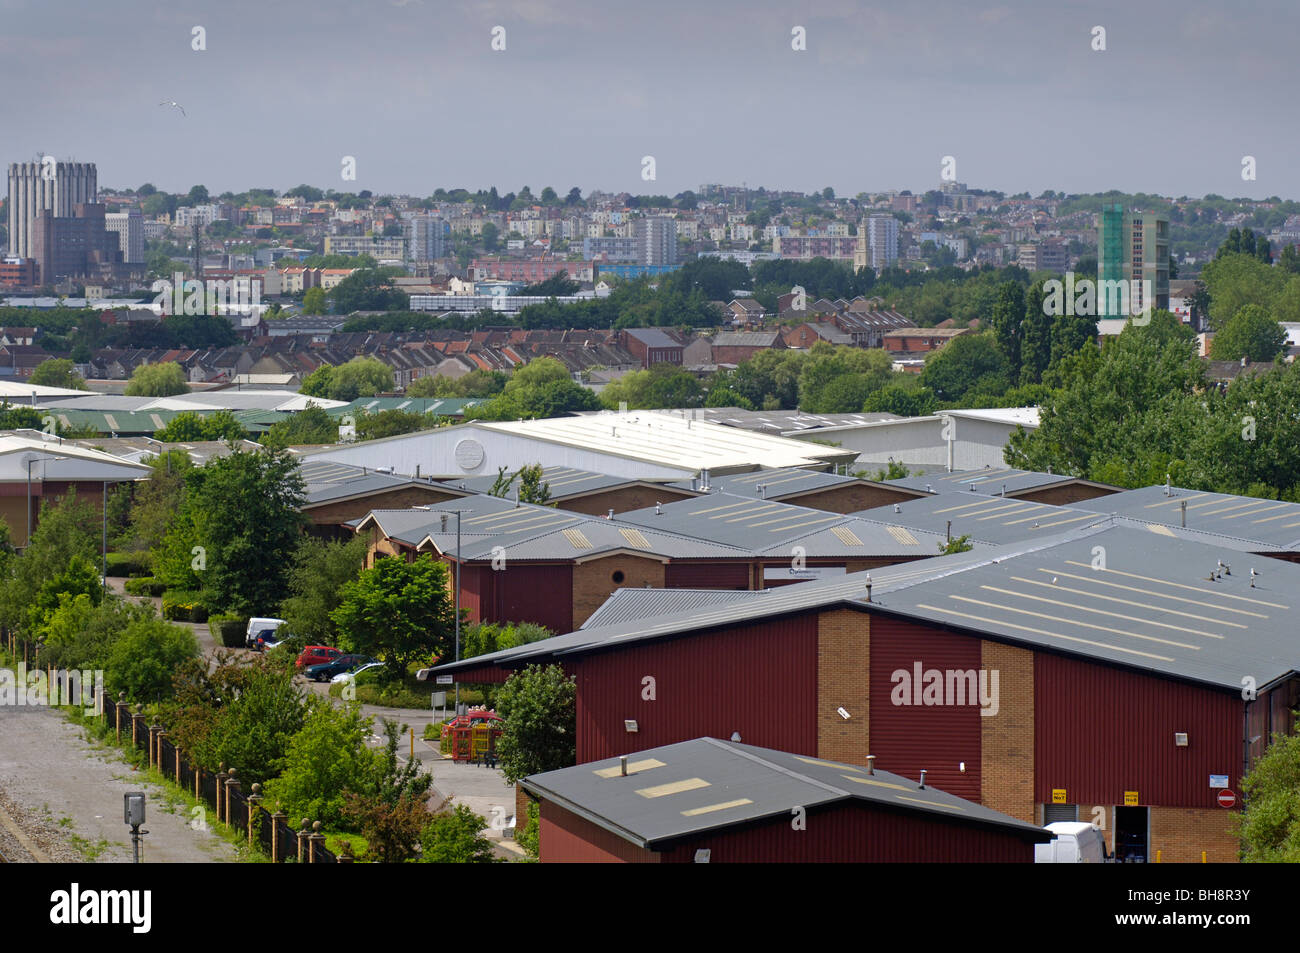 Industrial estate on the edge of a city Stock Photo